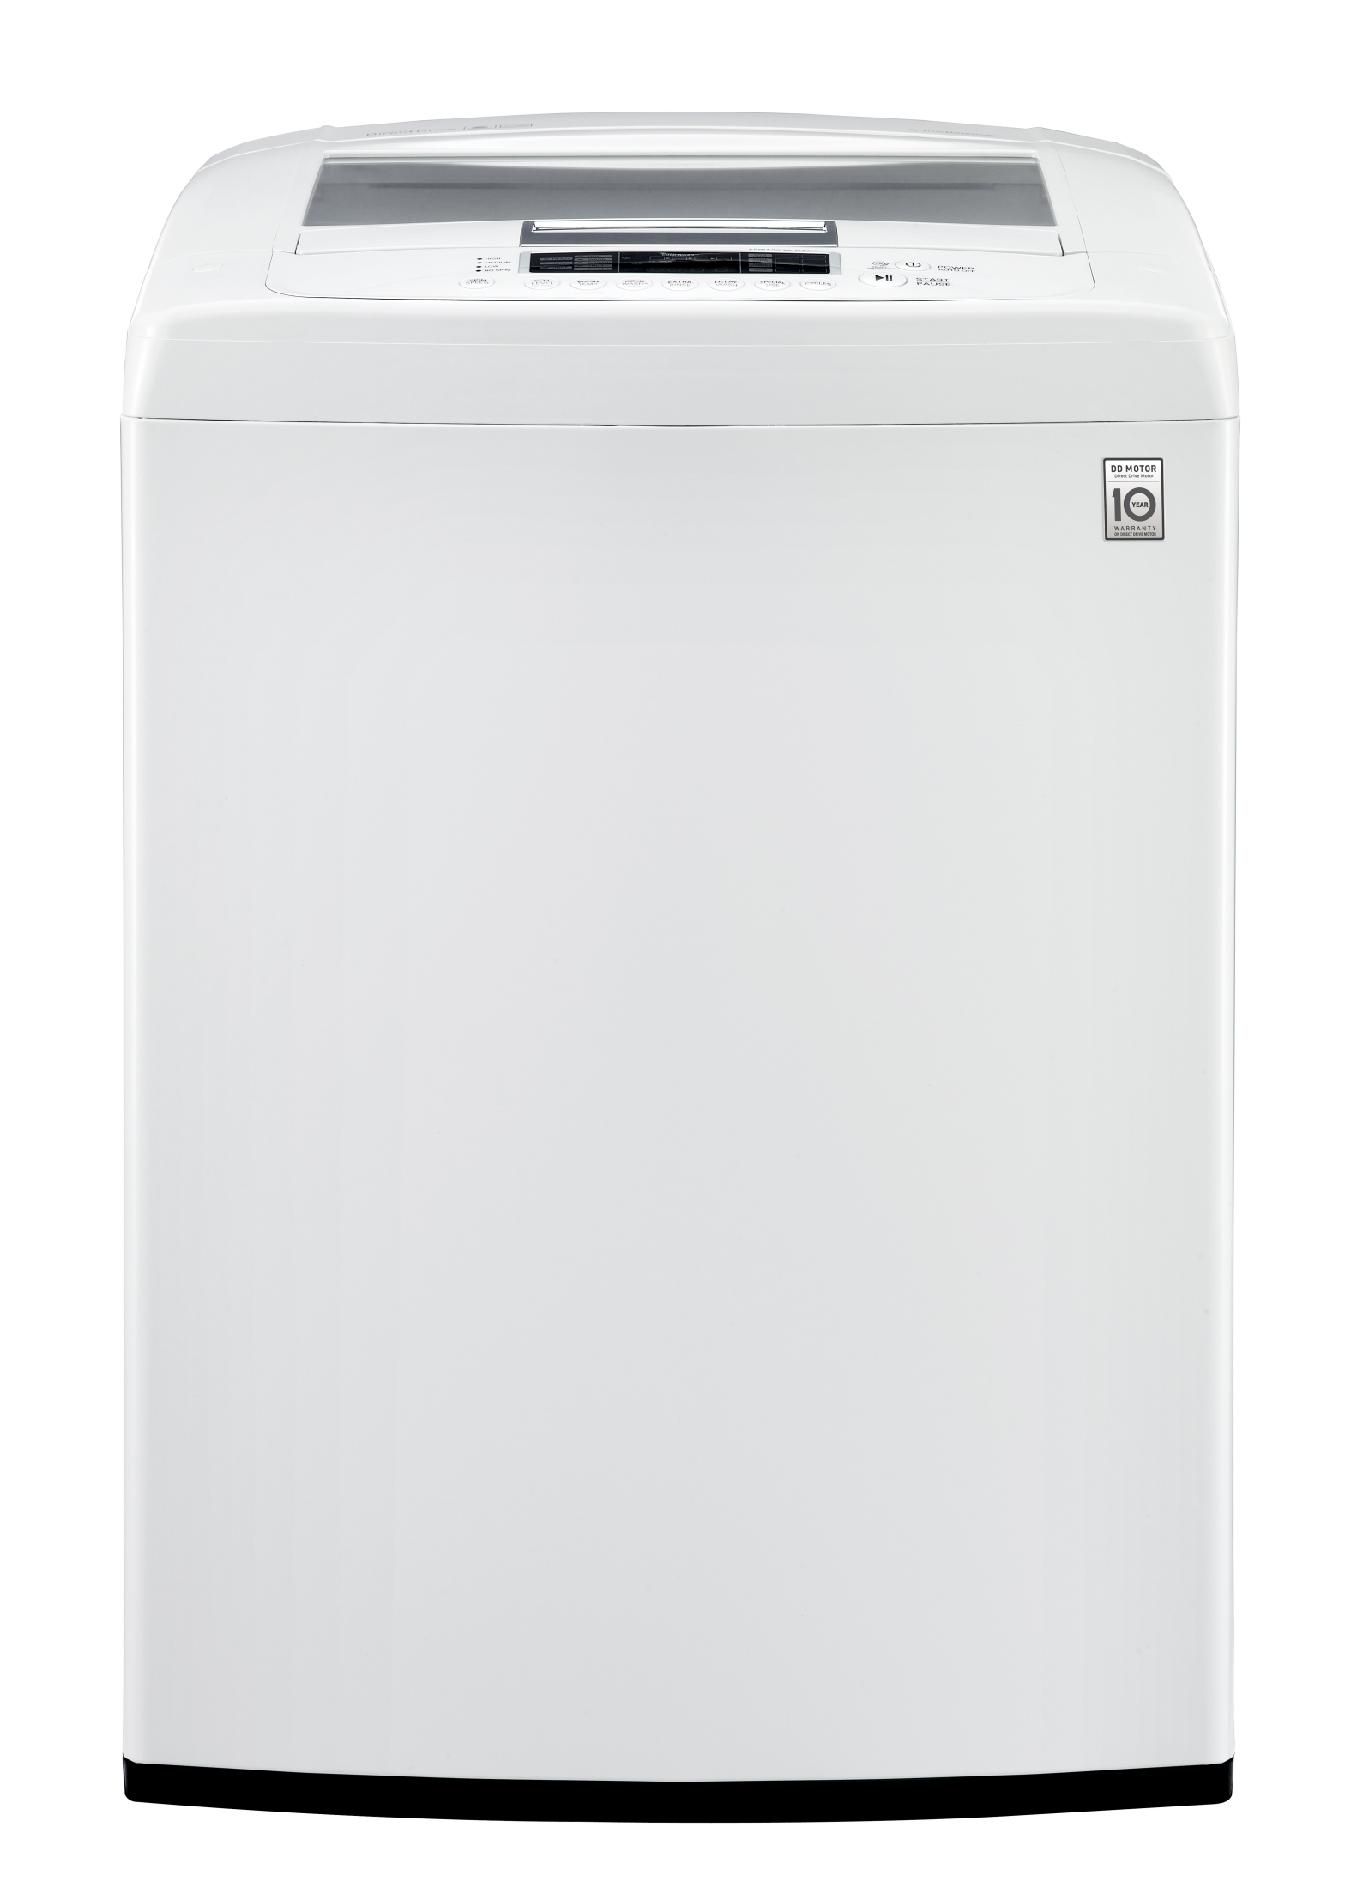 LG 4.3 cu. ft. High-Efficiency Top-Load Washer - White